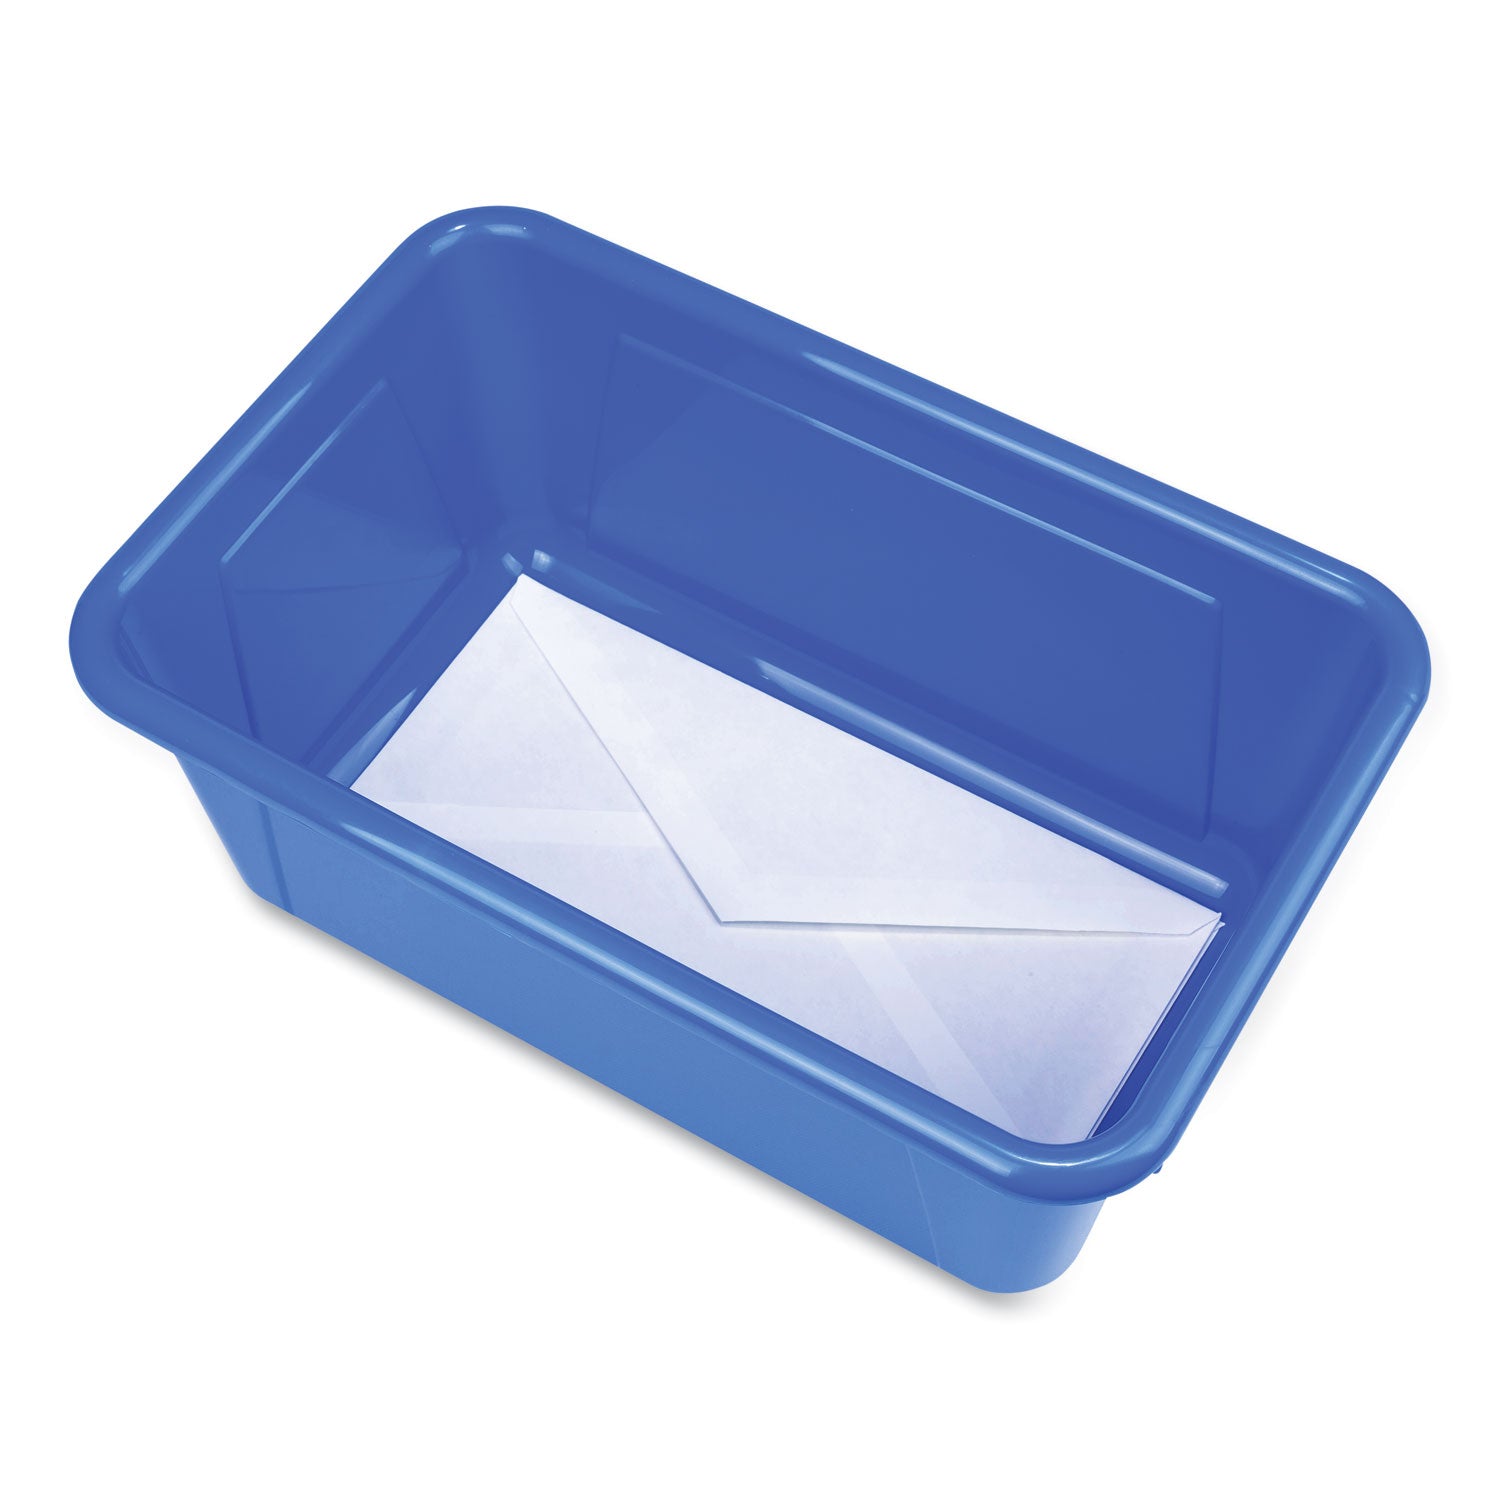 cubby-bin-with-lid-1-section-2-gal-82-x-125-x-115-blue-5-pack_stx62408u05c - 2